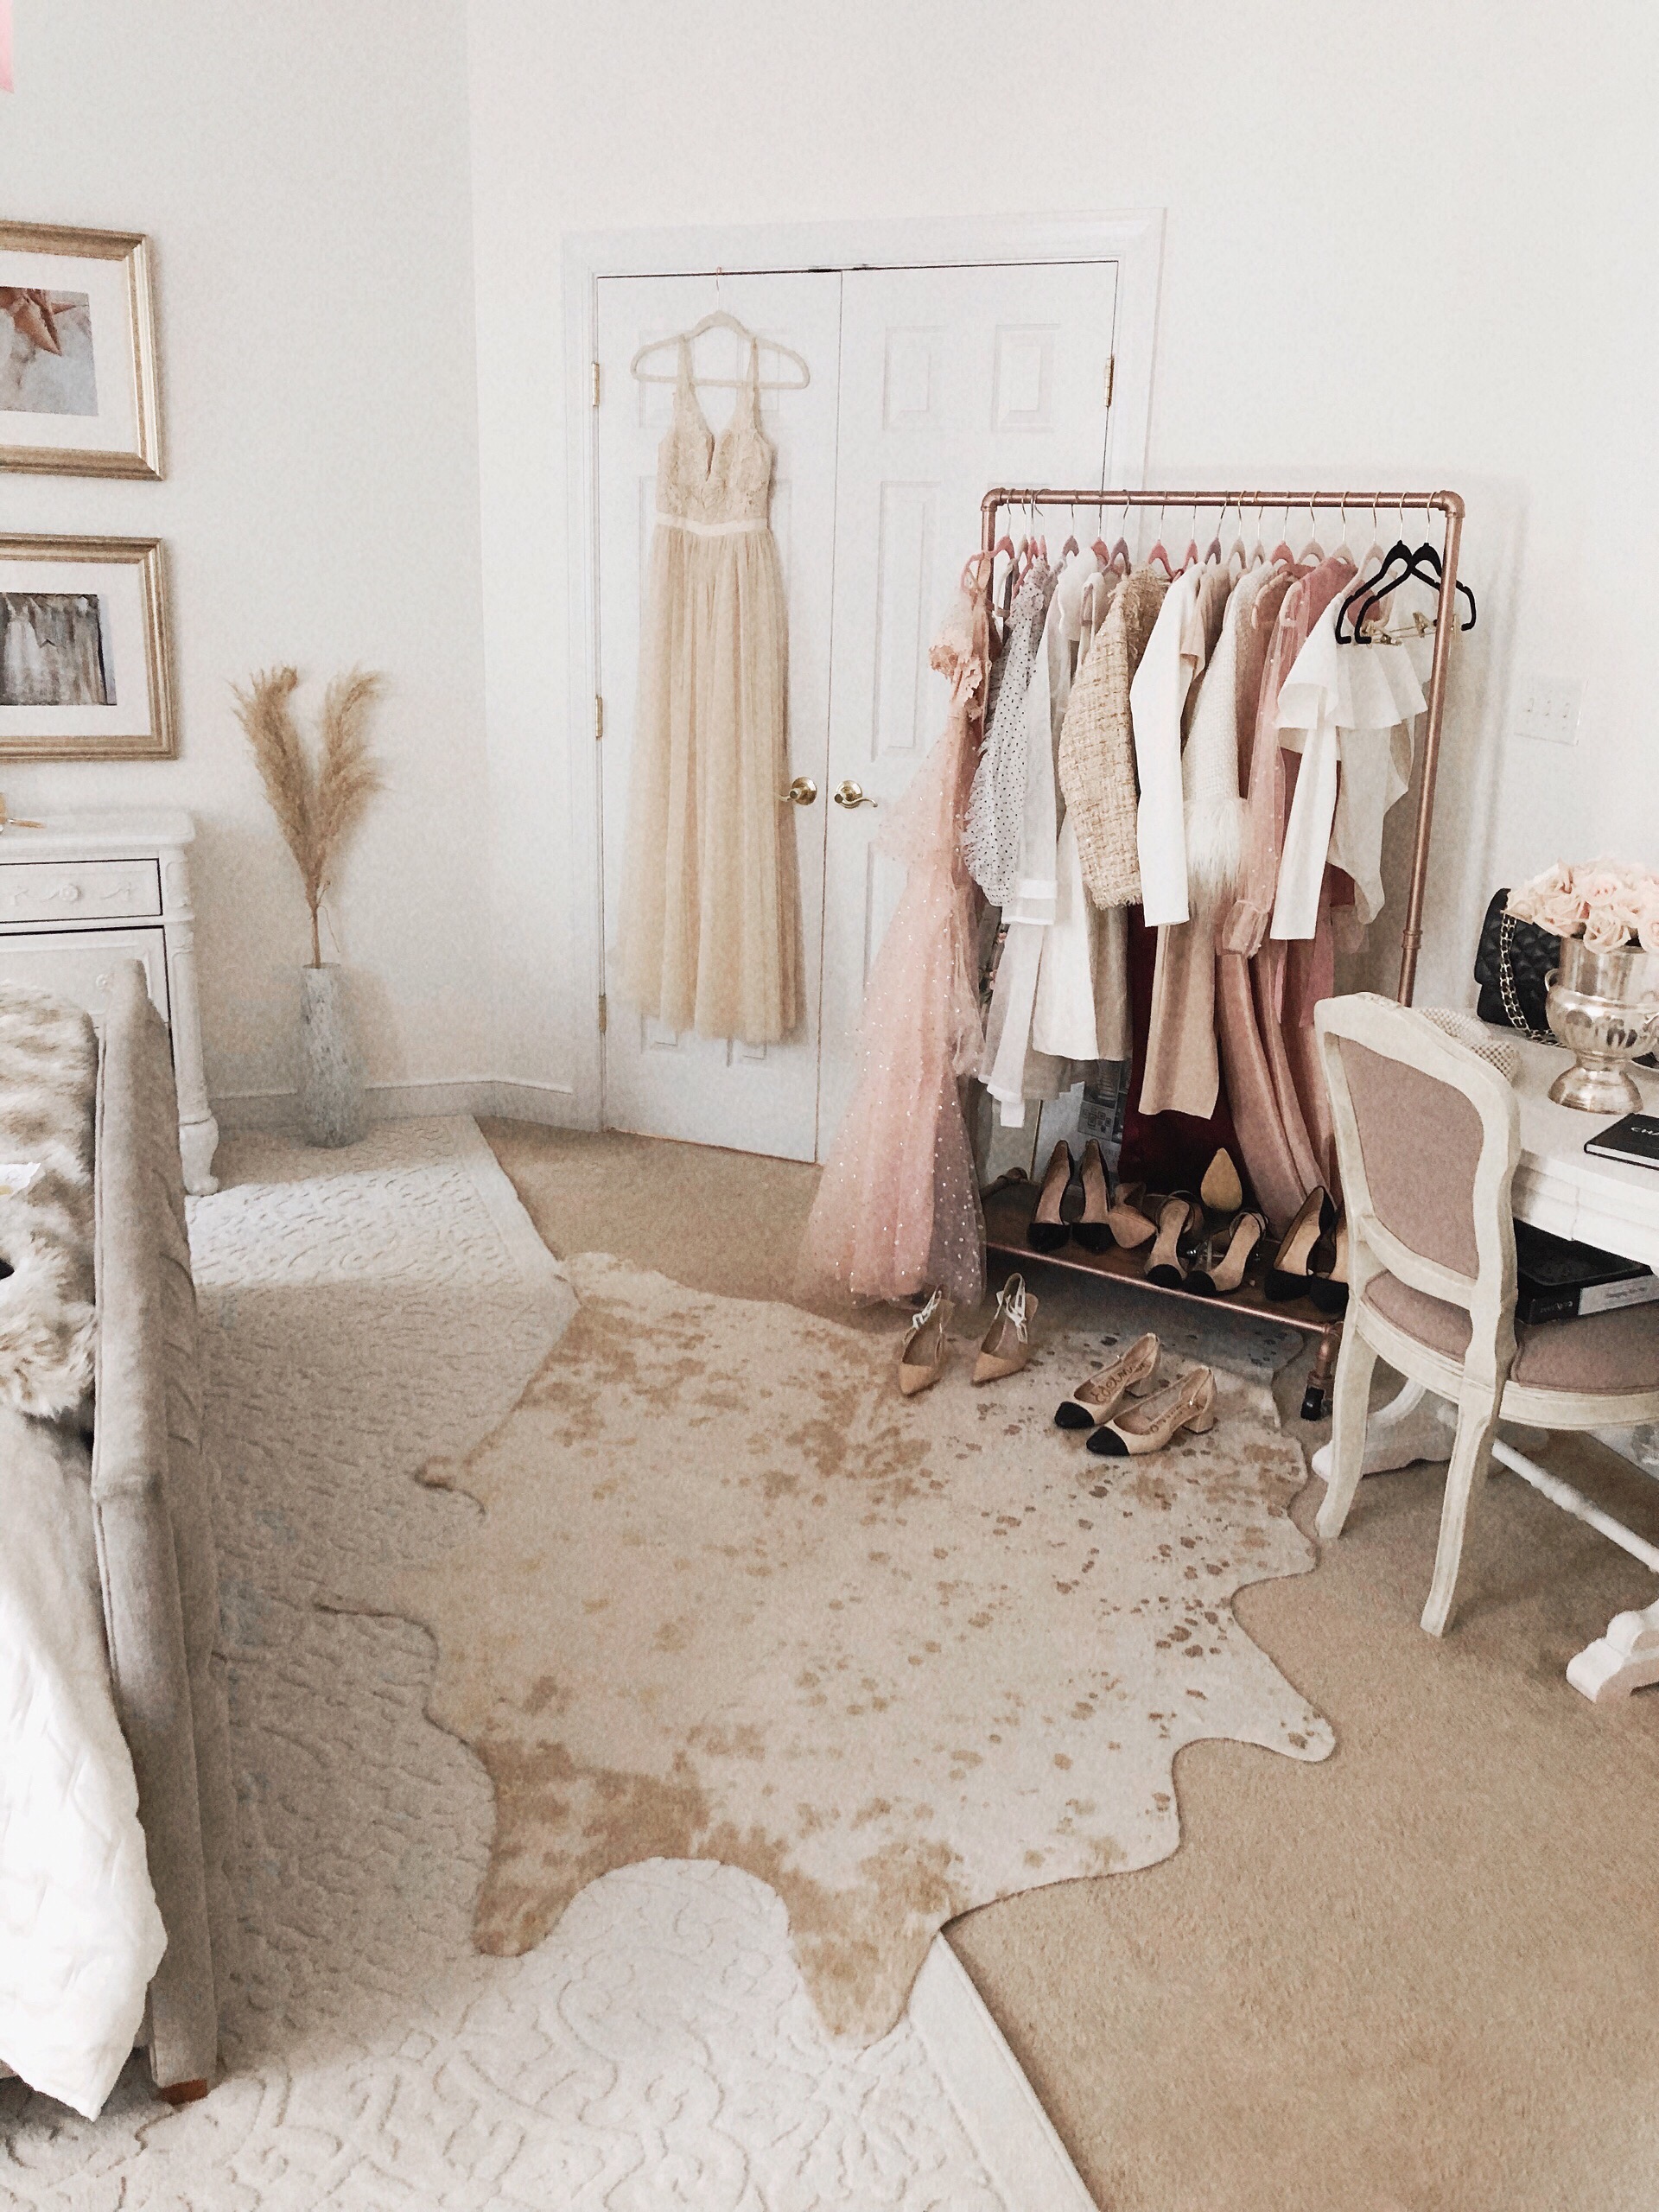 Top 10 juicy couture room ideas and inspiration